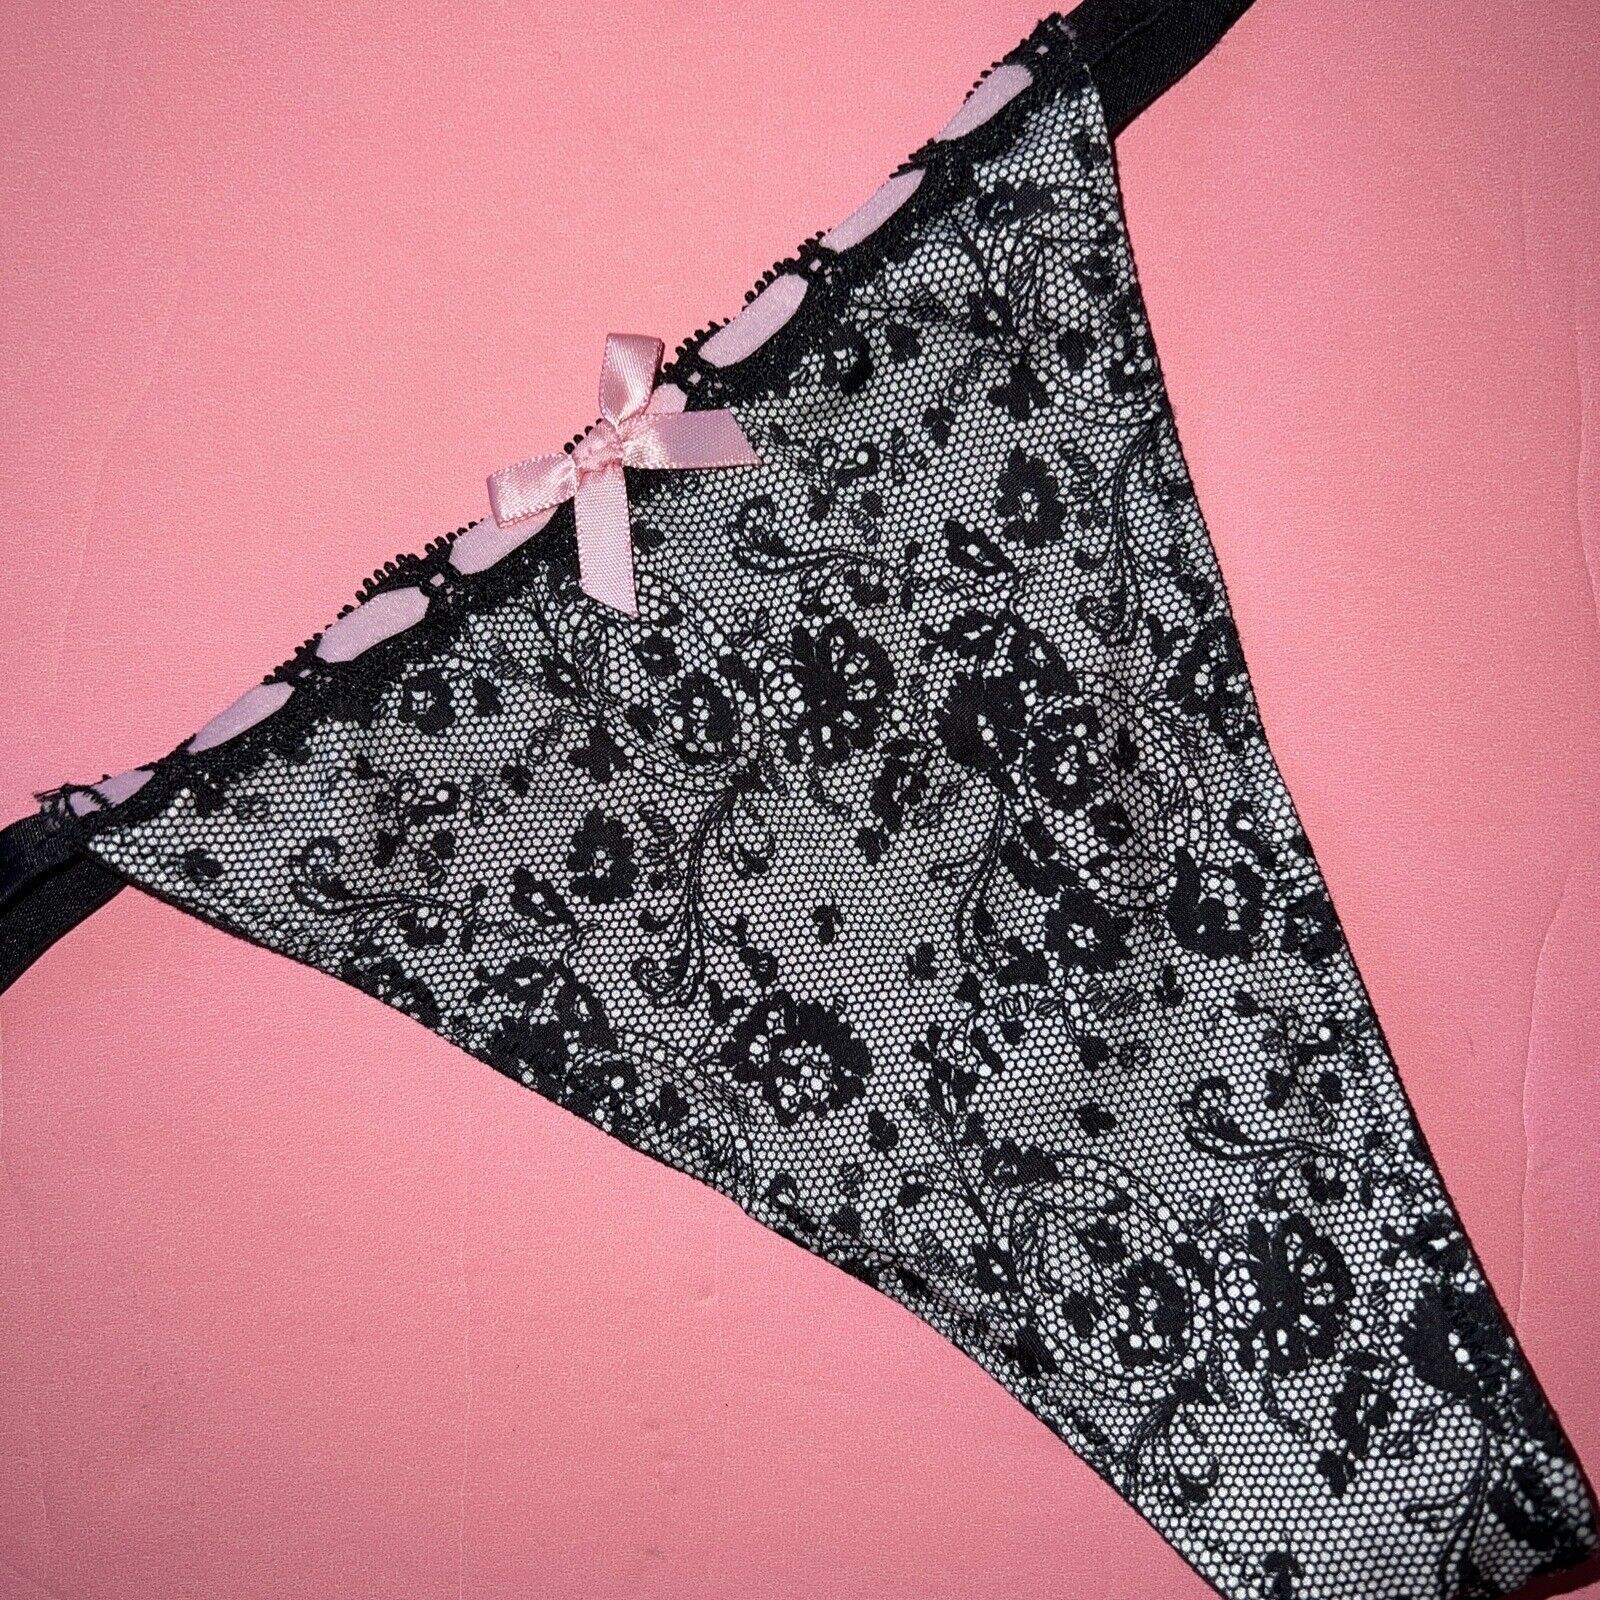 Primary image for Victoria's Secret BOMBSHELL O/S THONG Black White Lace Print Pink Ribbon